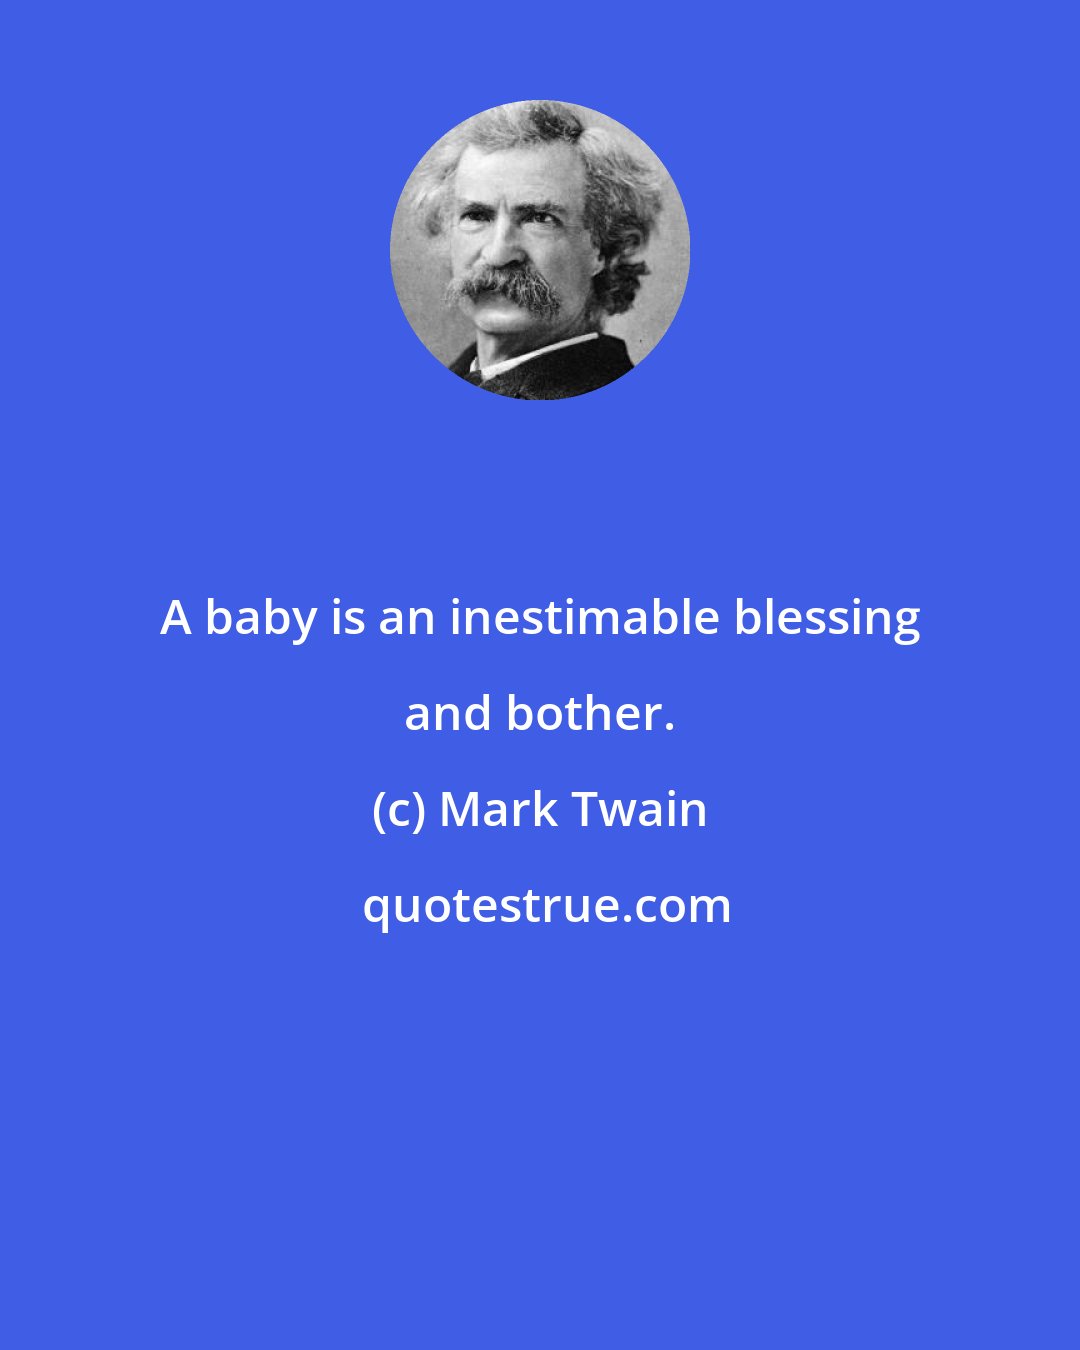 Mark Twain: A baby is an inestimable blessing and bother.